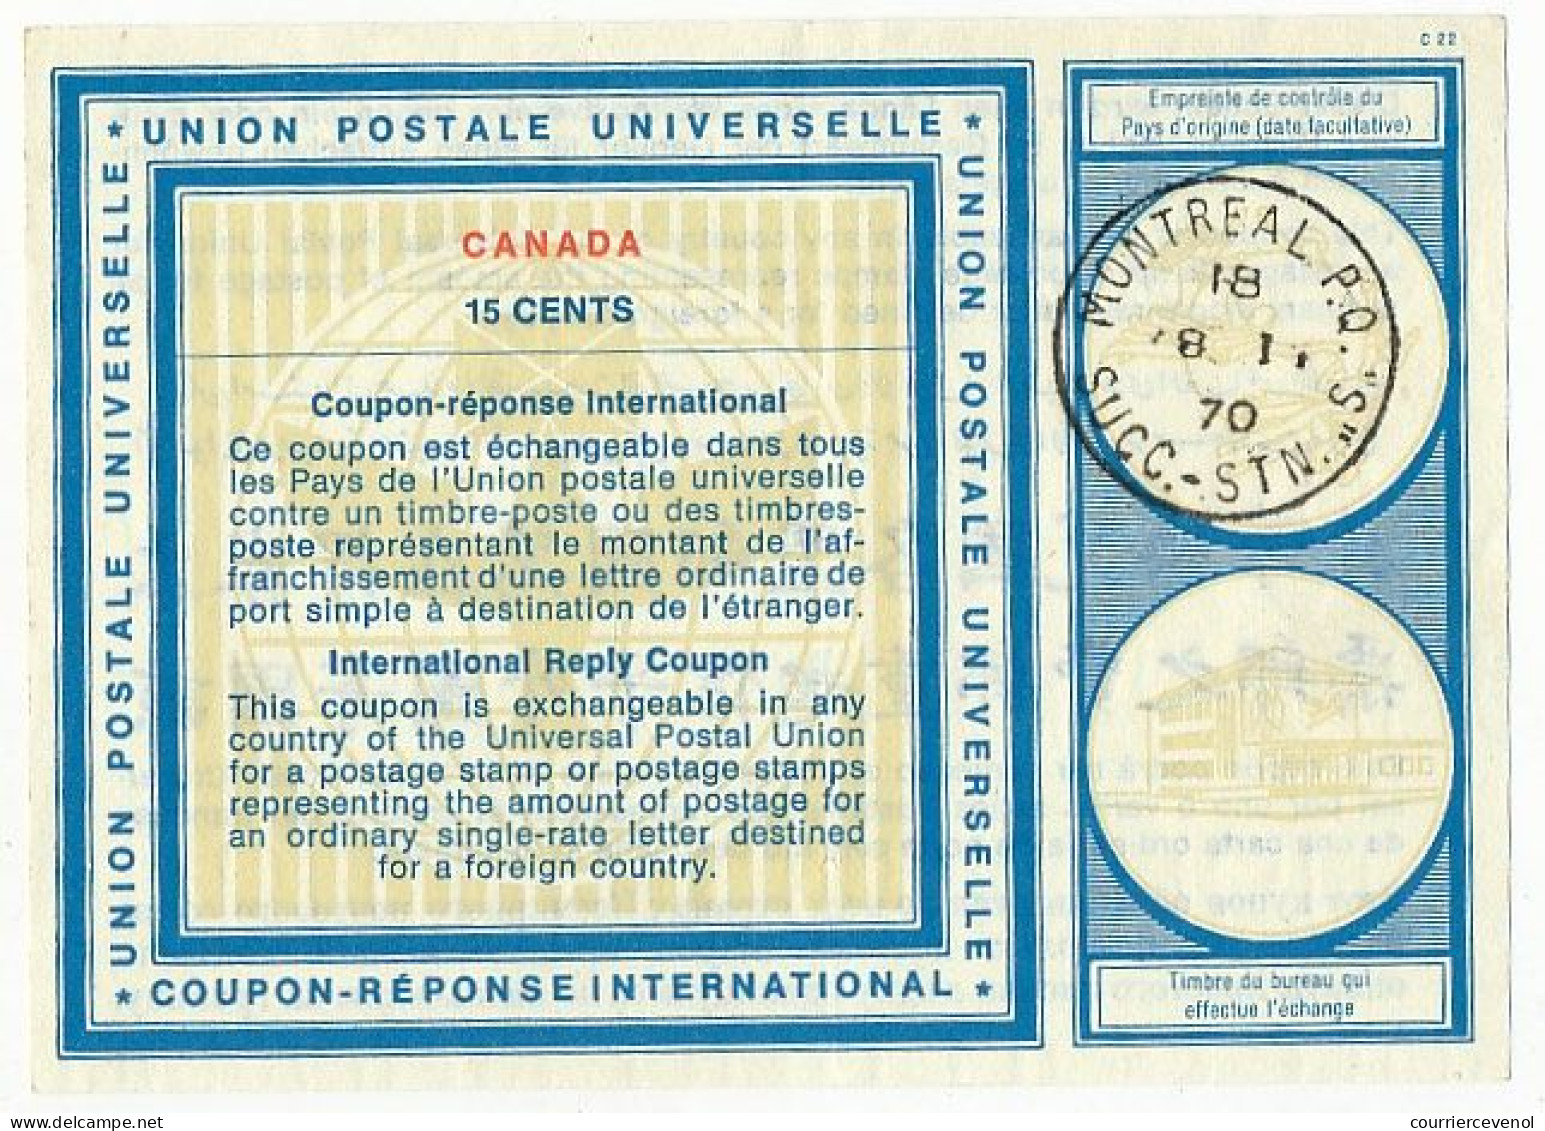 CANADA - COUPON REPONSE INTERNATIONAL. INTERNATIONAL REPLY COUPON. 15 CENTS. MONTREAL P.Q. - Antwoordcoupons